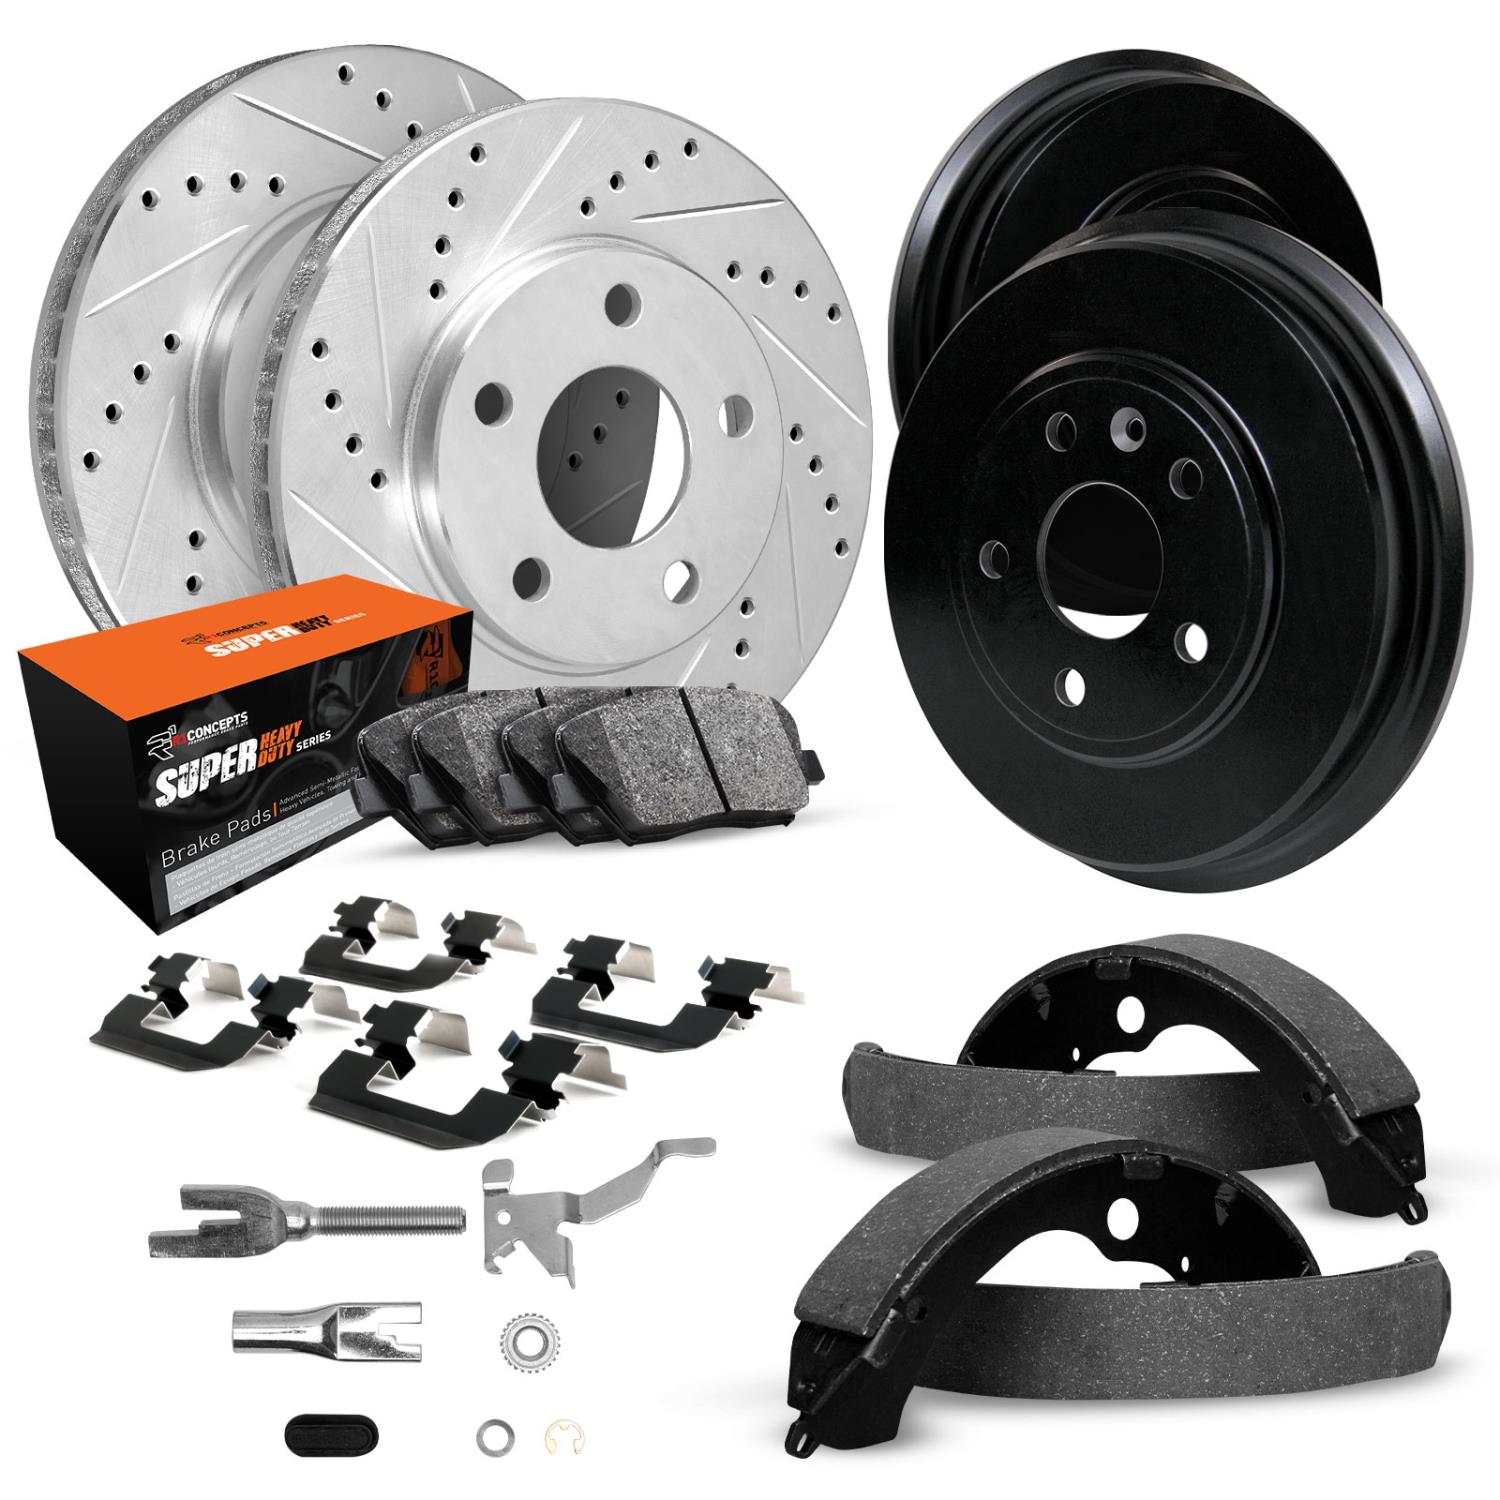 E-Line Drilled/Slotted Silver Rotor & Drum Set w/Super-Duty Pads, Shoes/Hardware/Adjusters, 1986-1992 Ford/Lincoln/Mercury/Mazda